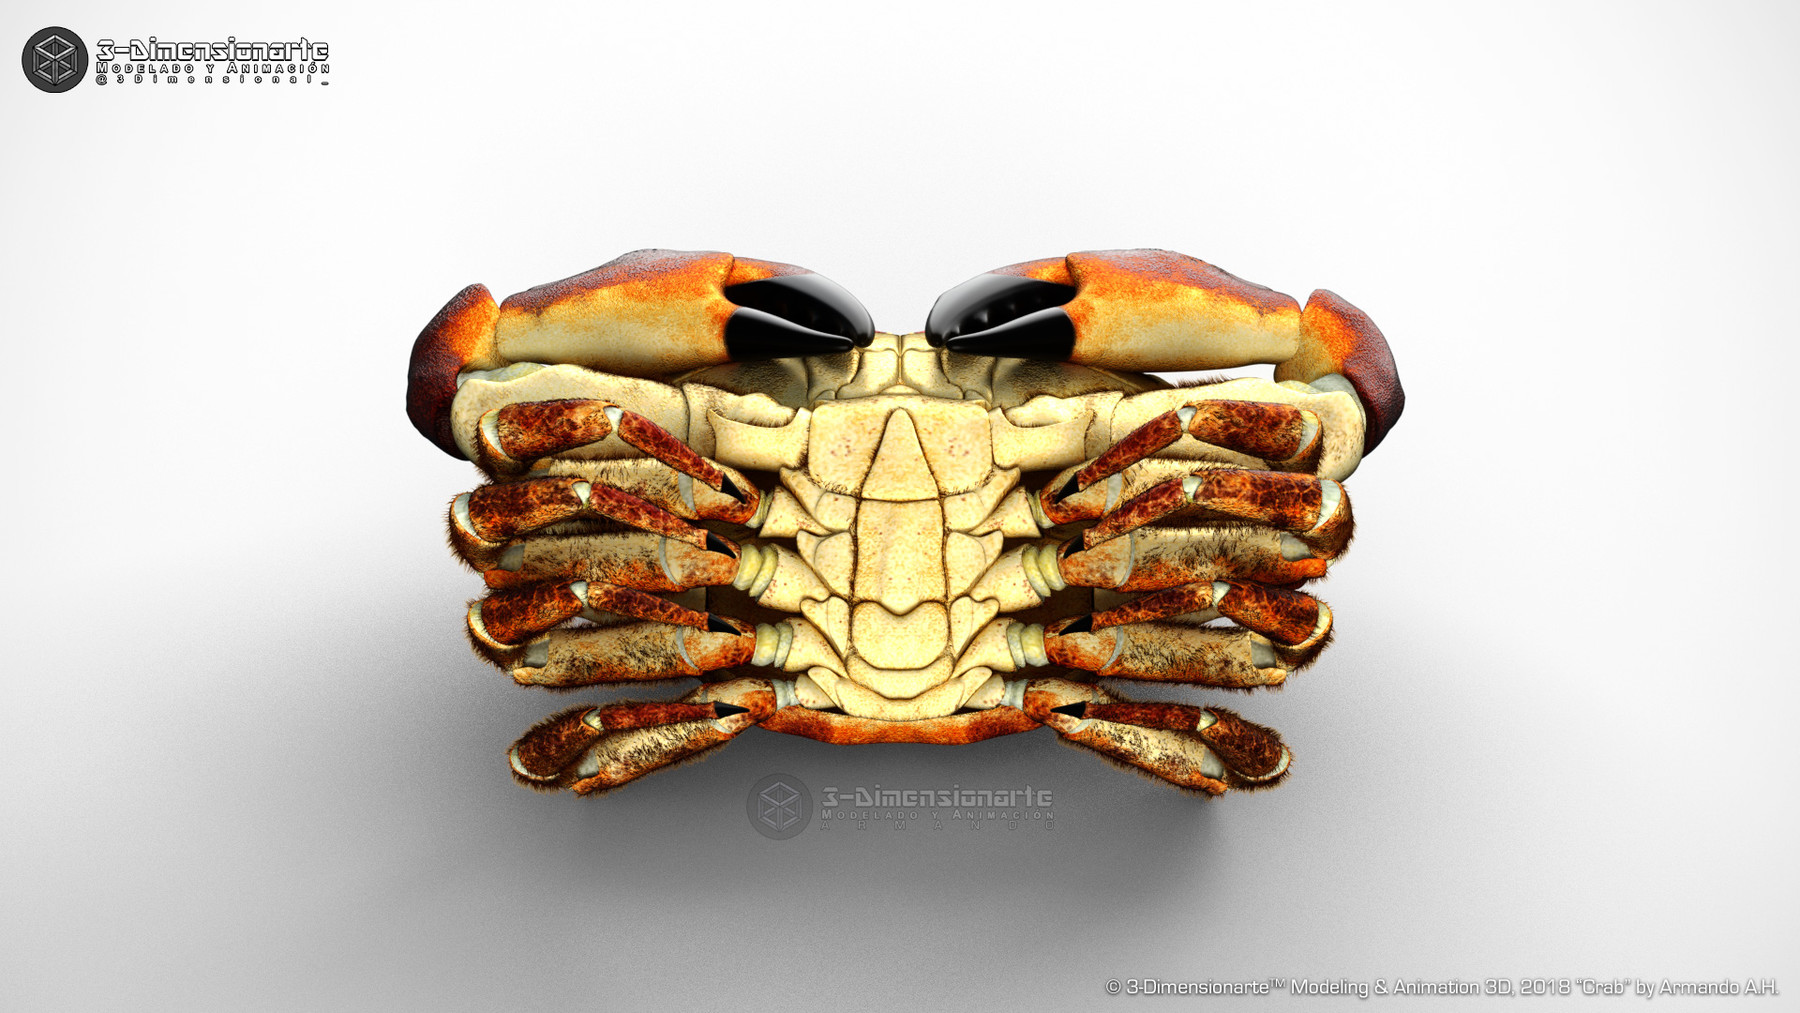 crab game character